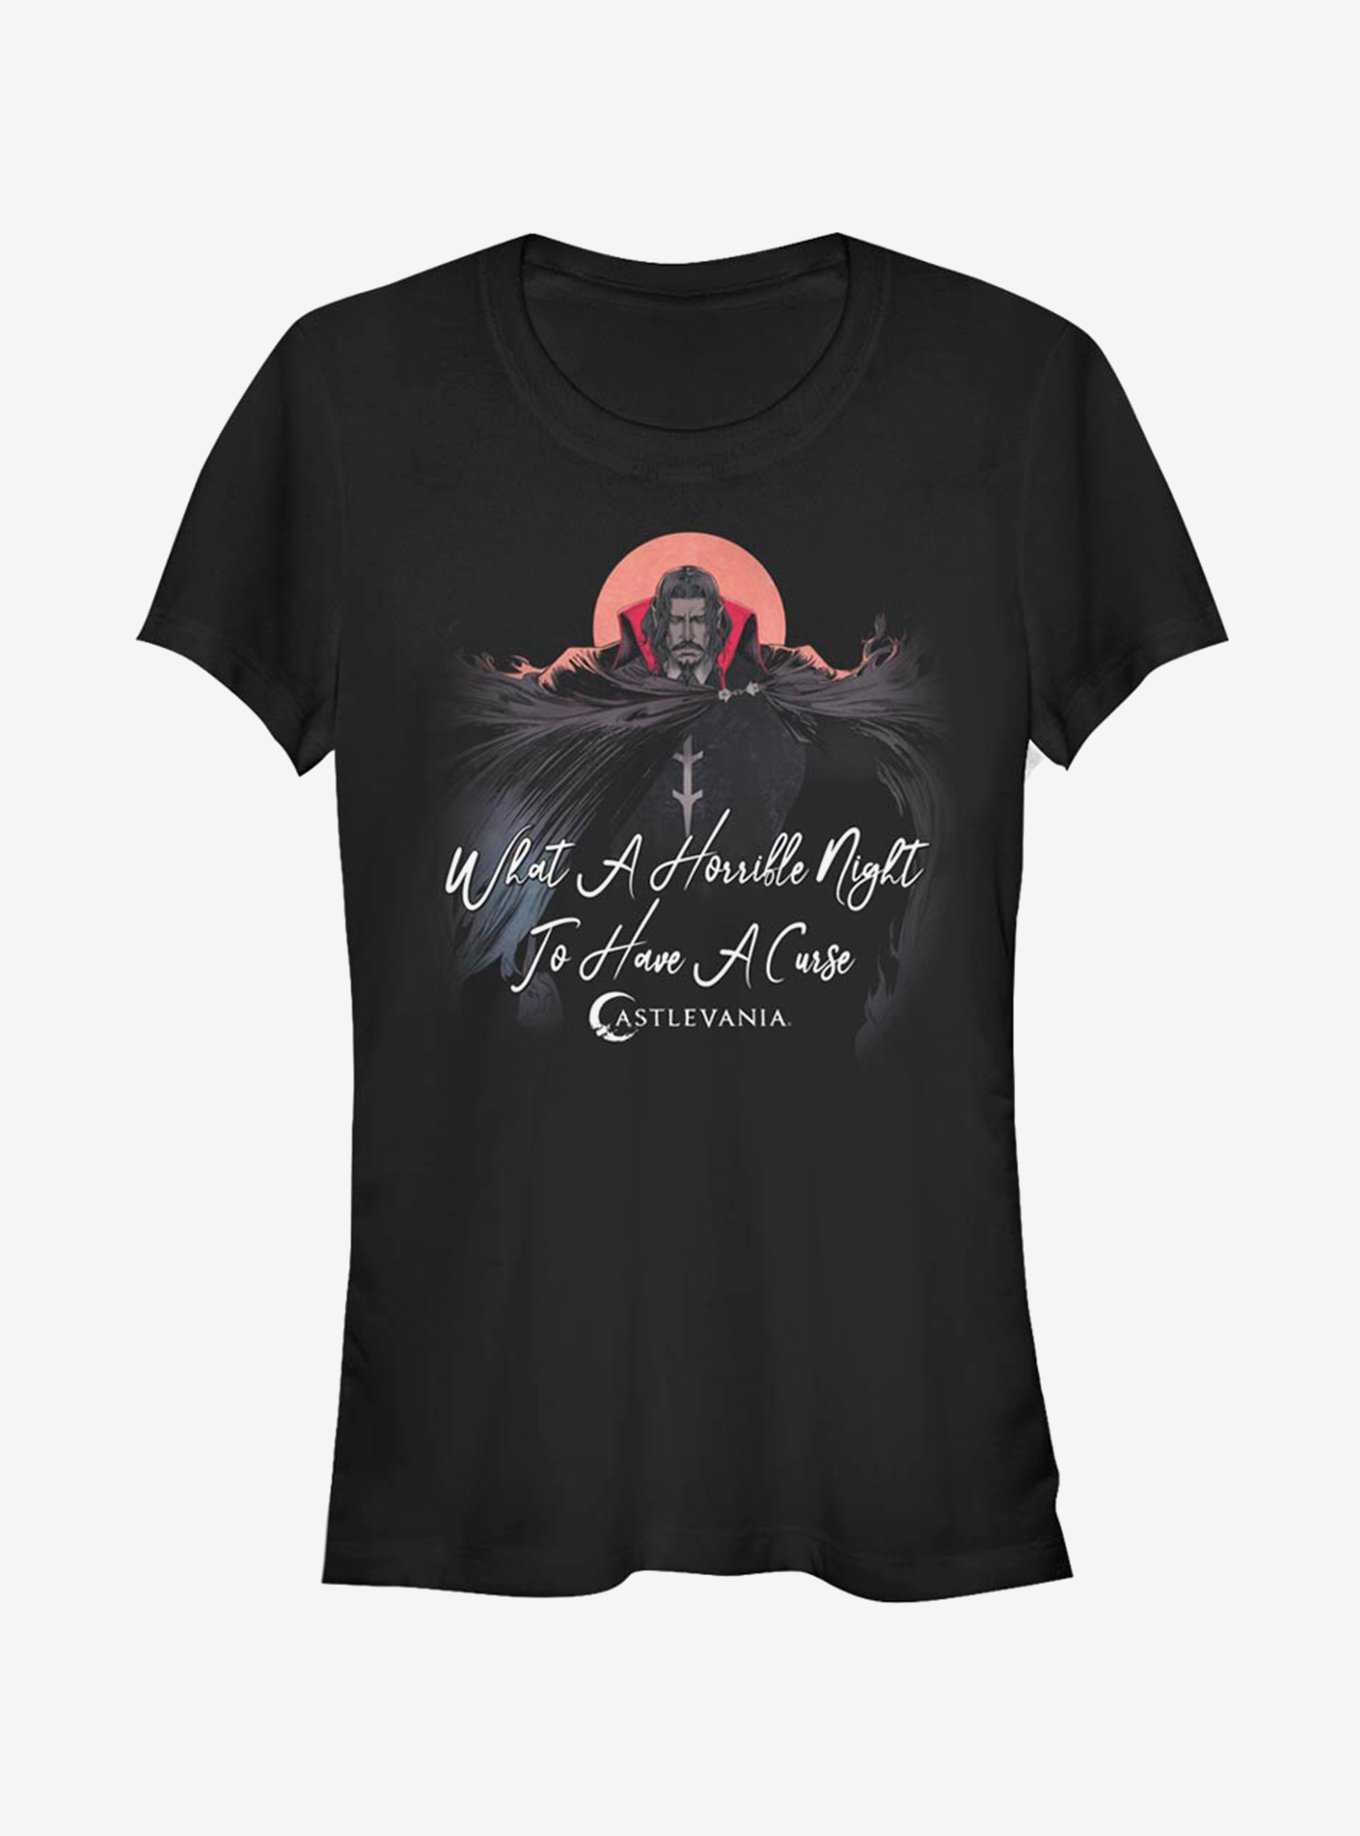 Castlevania Horrible Night To Have A Curse Girls T-Shirt, , hi-res